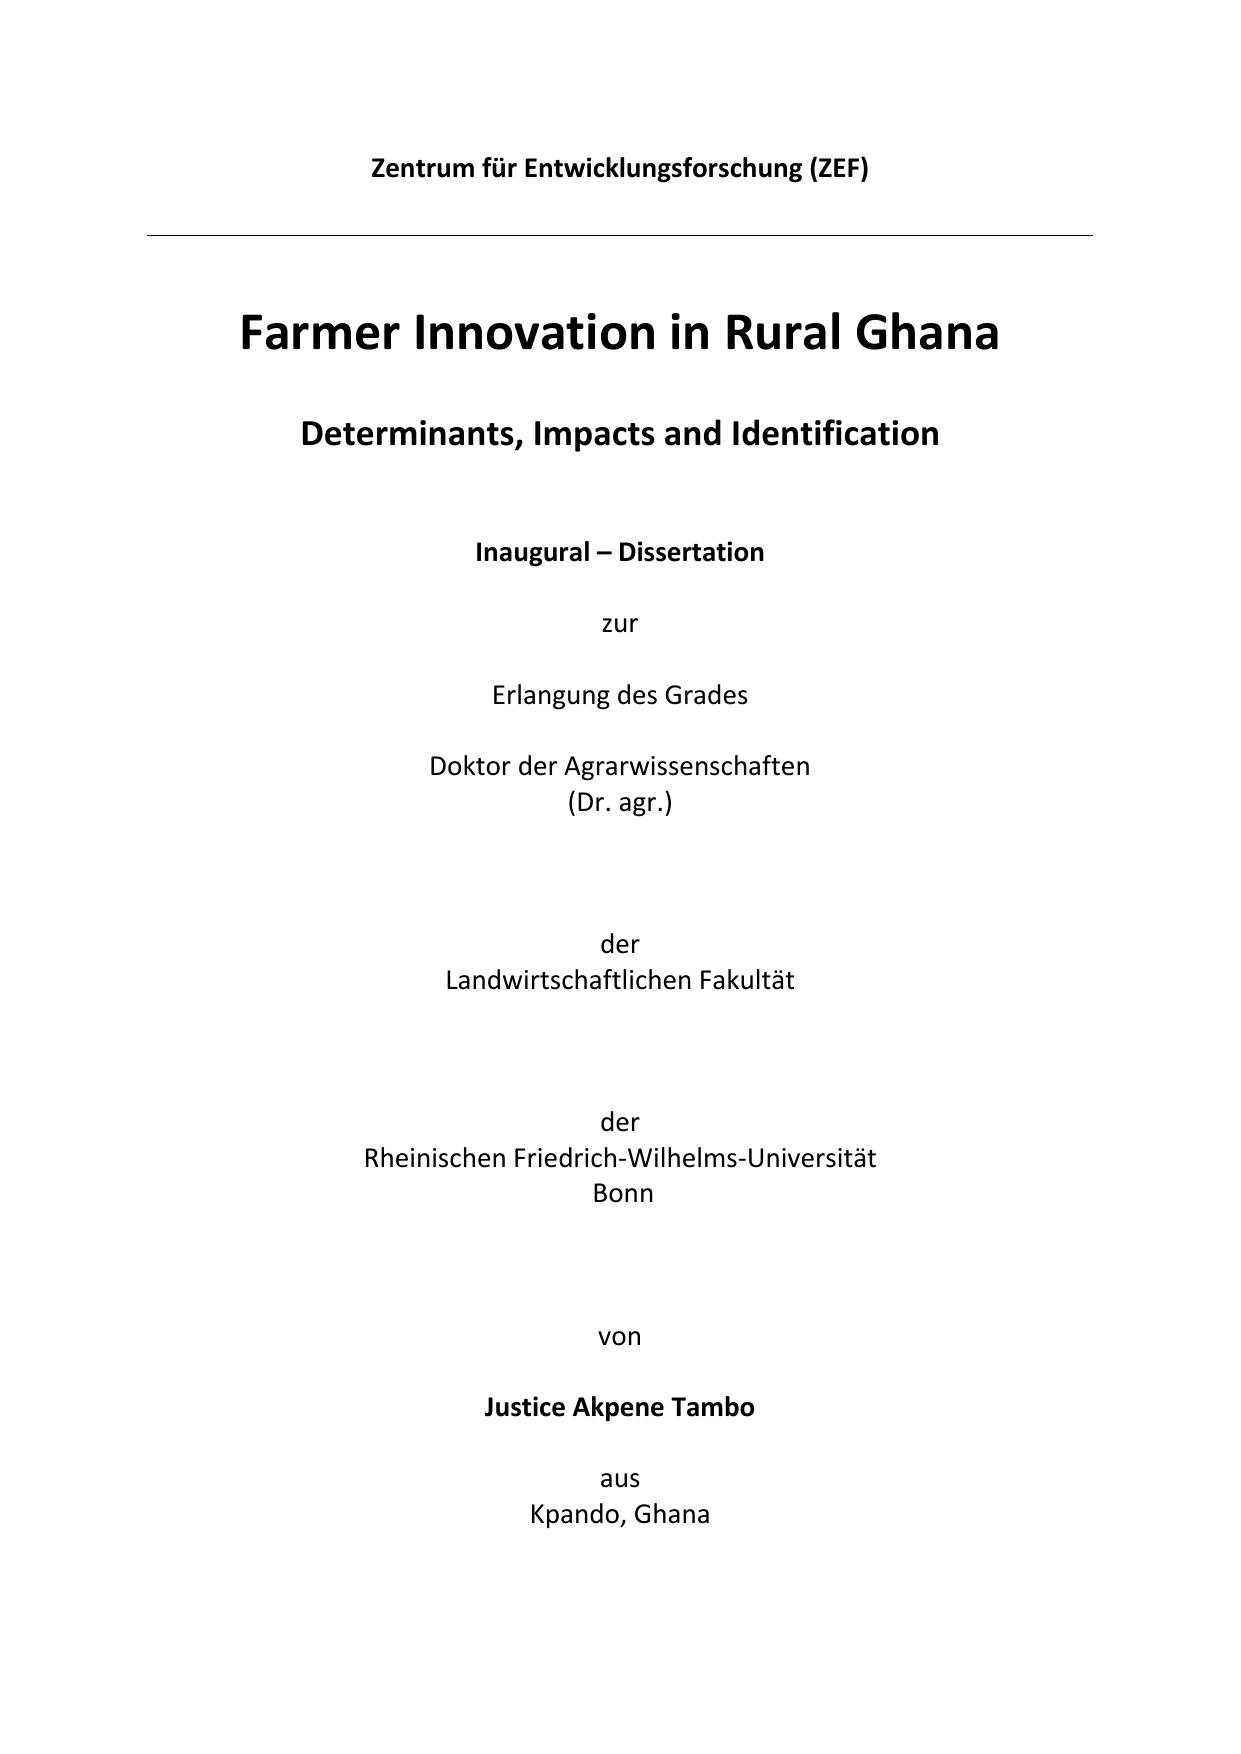 Farmer Innovation in Rural Ghana - Determinants, Impacts and Identification